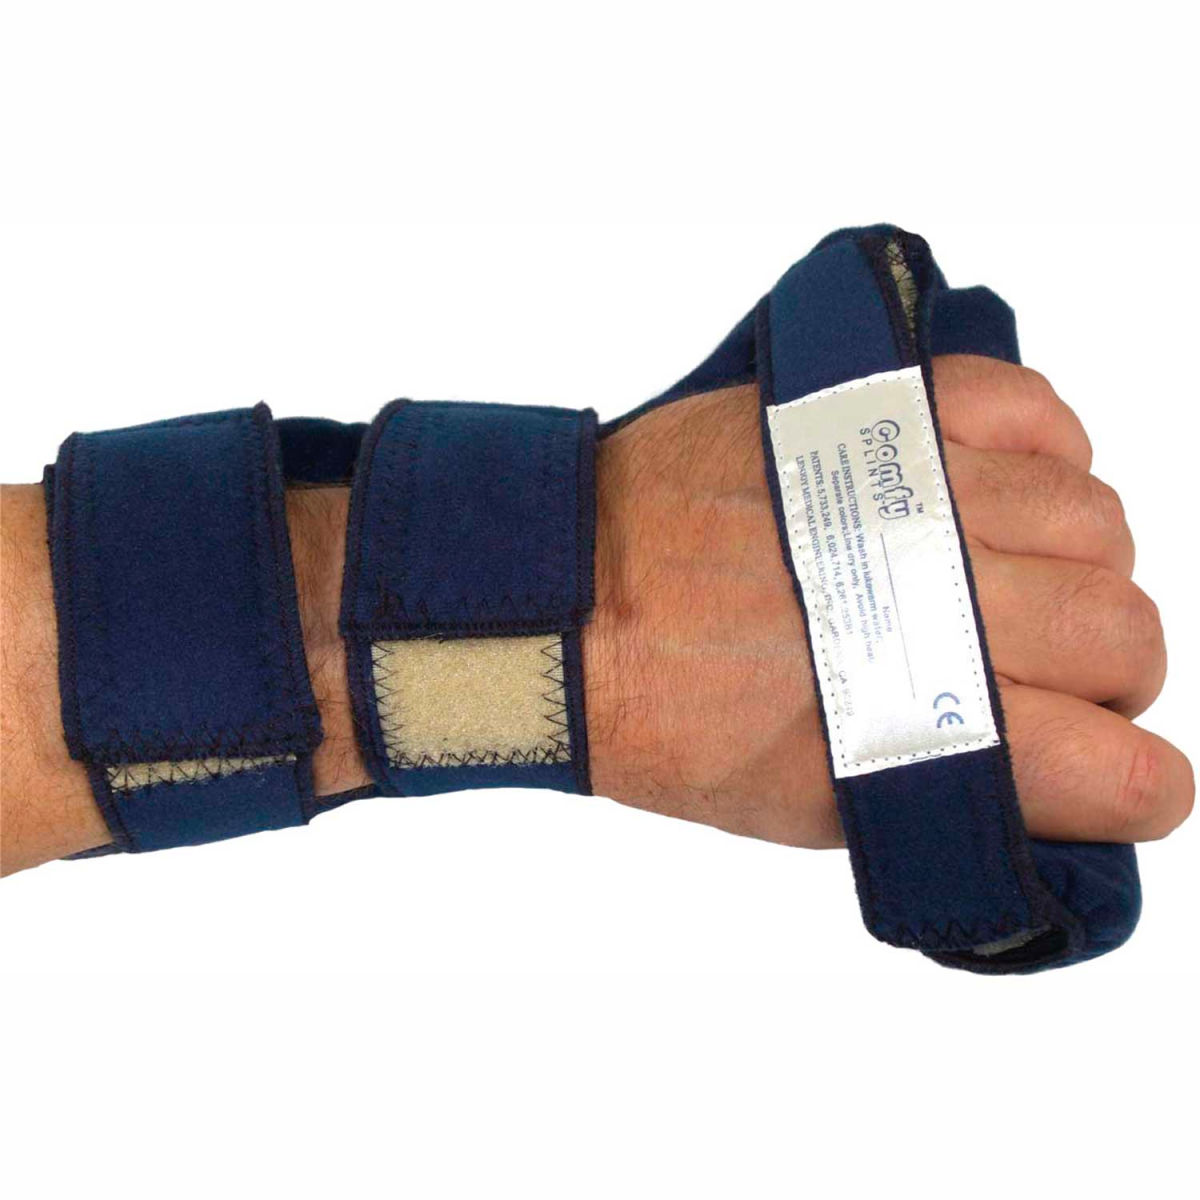 B2196751 Adult Small, Left Comfy Splints Comfy C-Grip Hand Orthosis with 1 Cover & 2 Soft Rolls -  Fabrication Enterprises